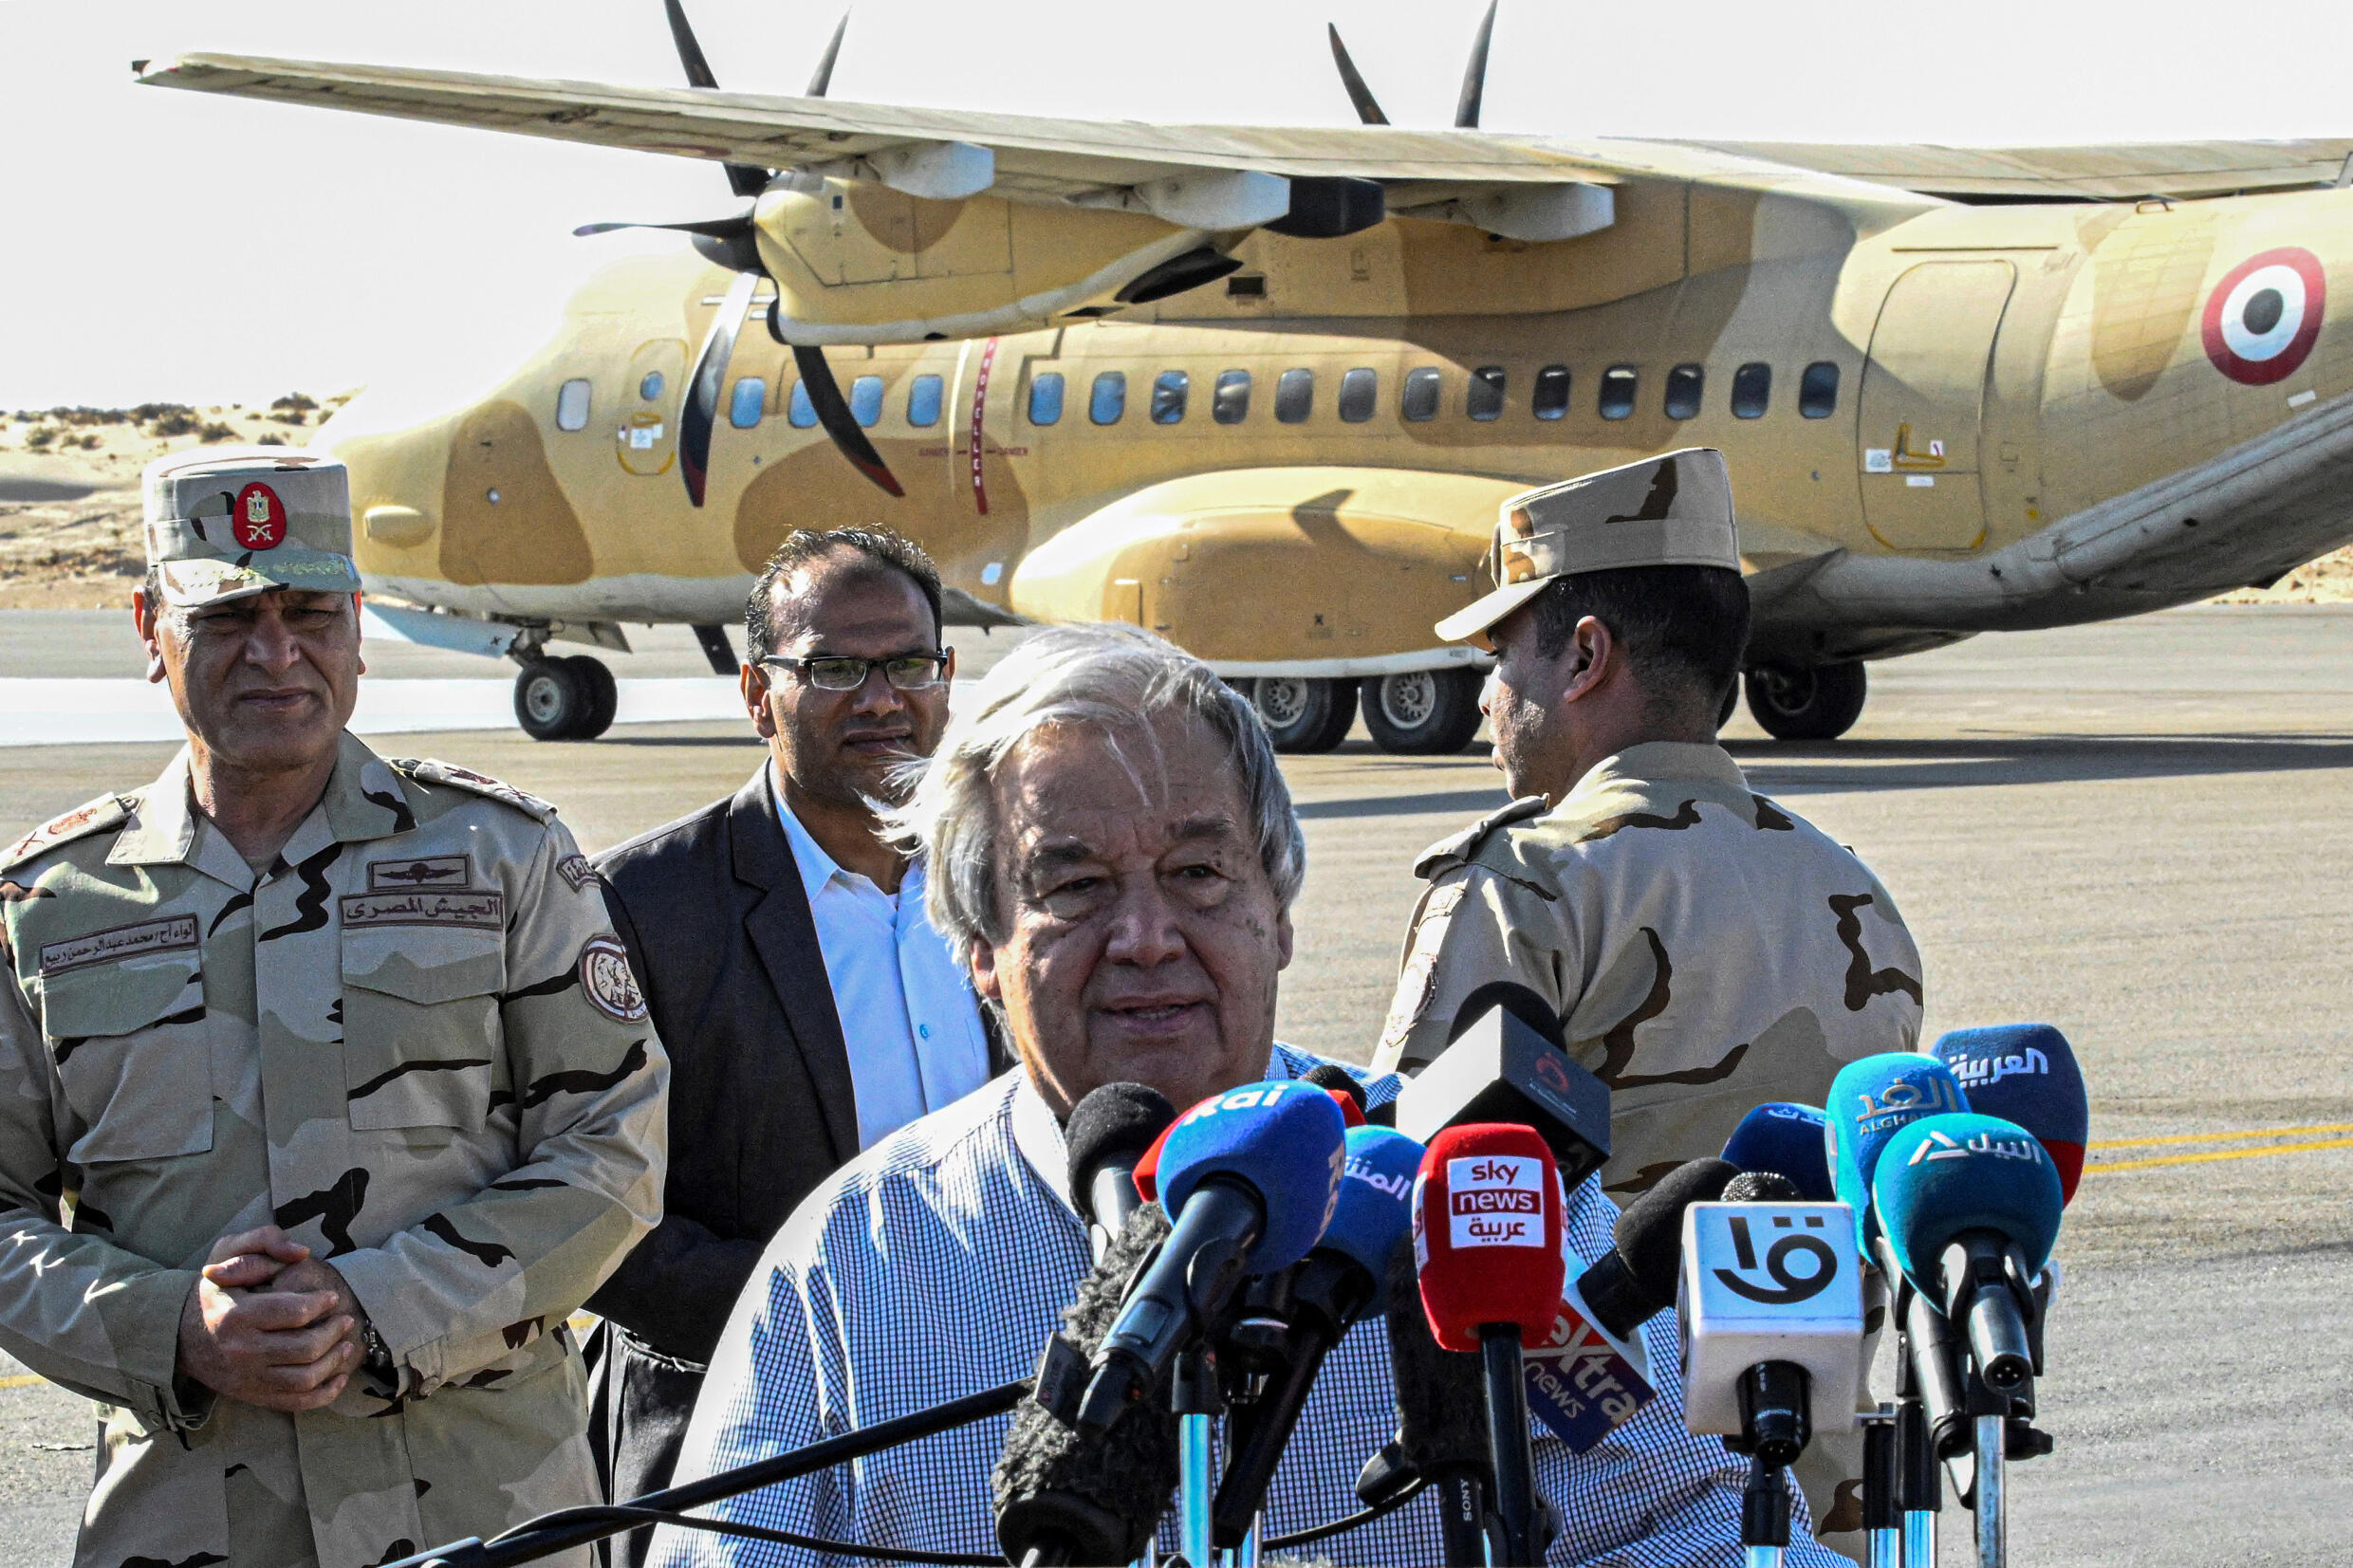 UN Secretary-General Antonio Guterres, speaking to reporters at El-Arish International Airport in Egypt, visited the Egyptian side of the Rafah crossing and urged an end to Gaza's 'nightmare'.